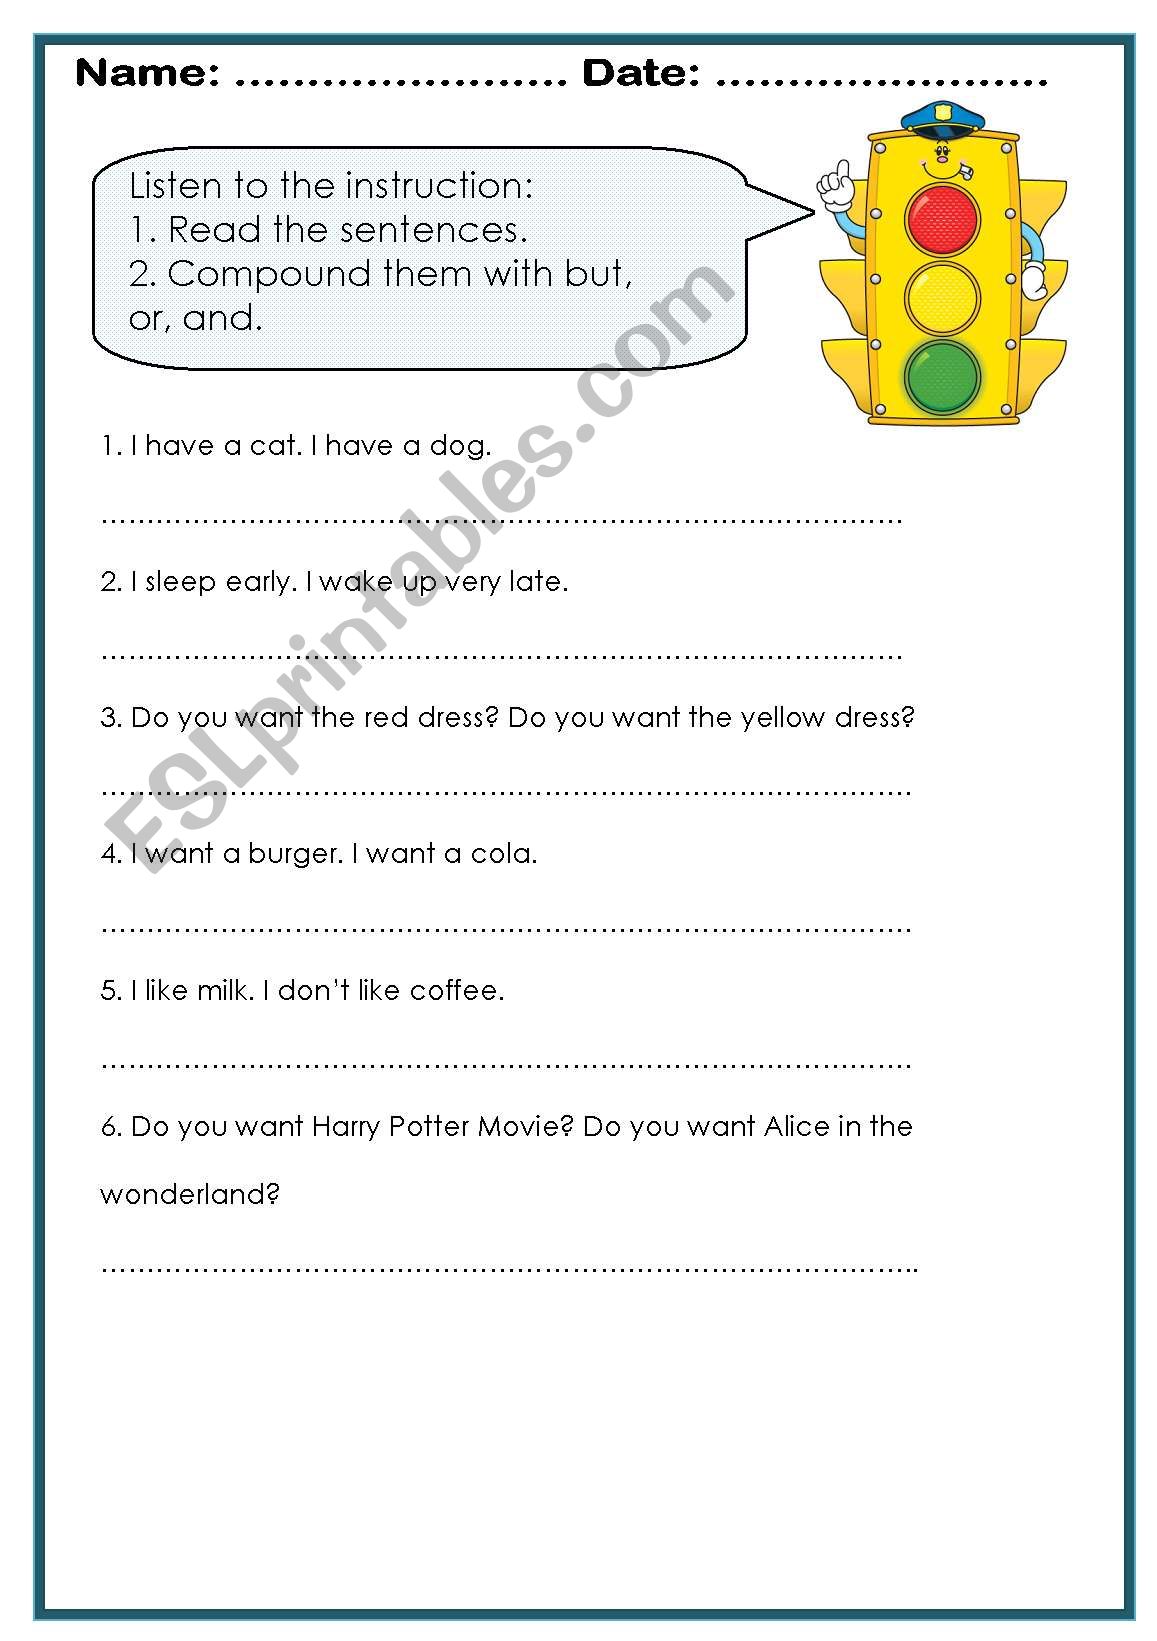 and-or-but-worksheets-photos